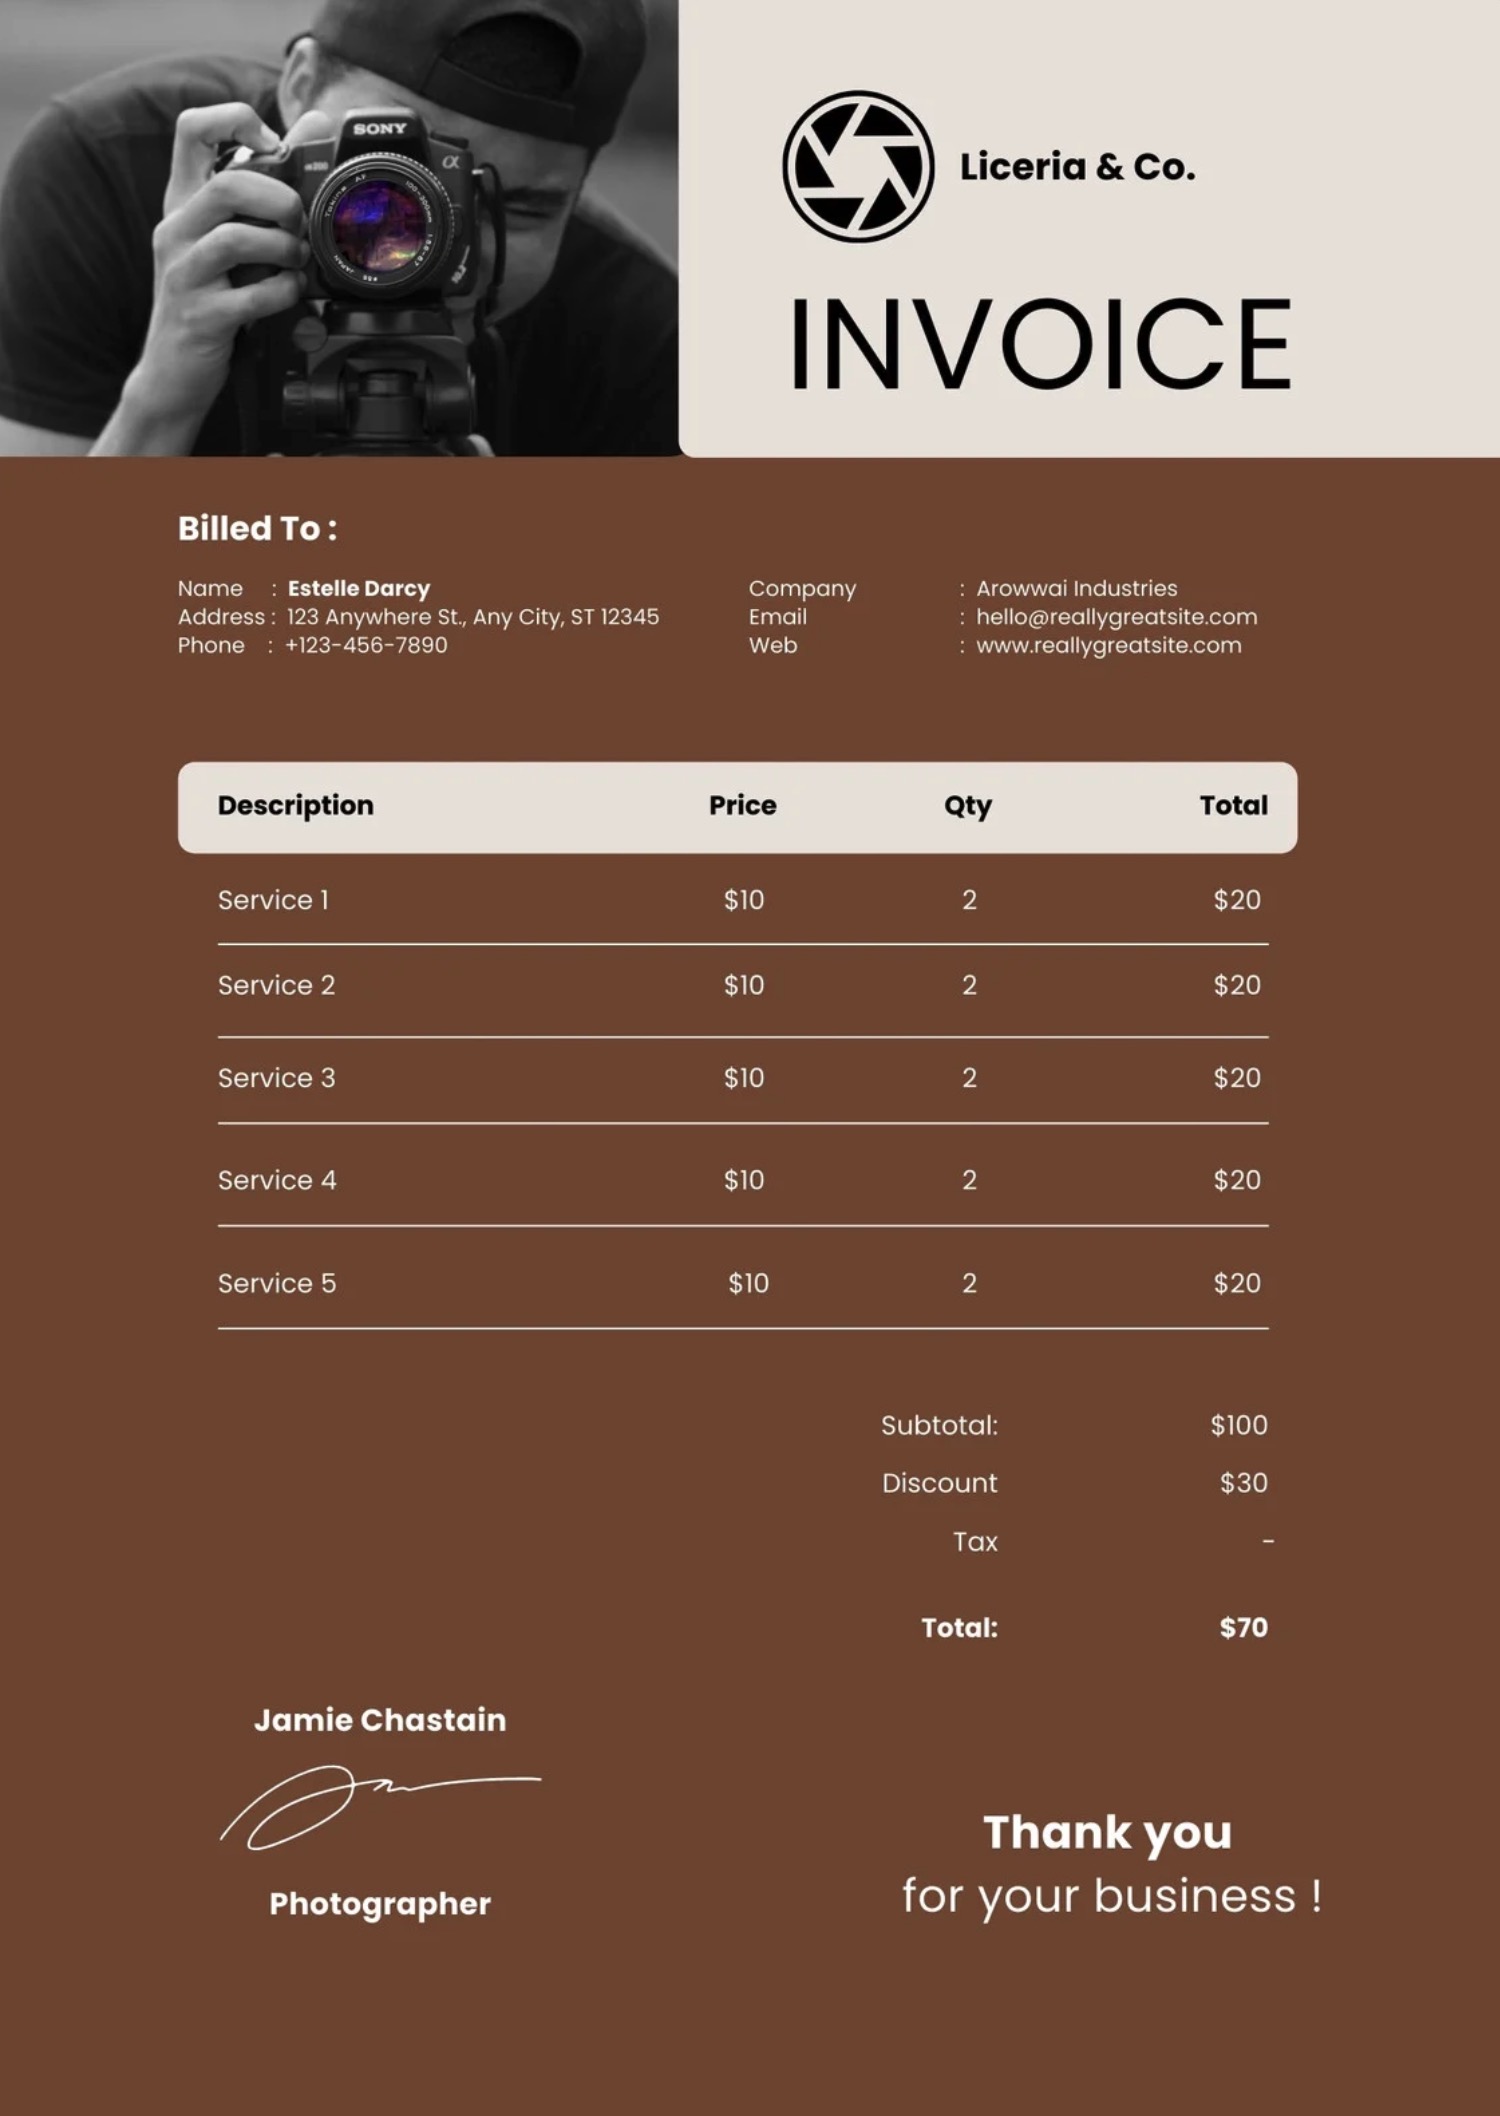 An invoice template with a photo of a photographer.